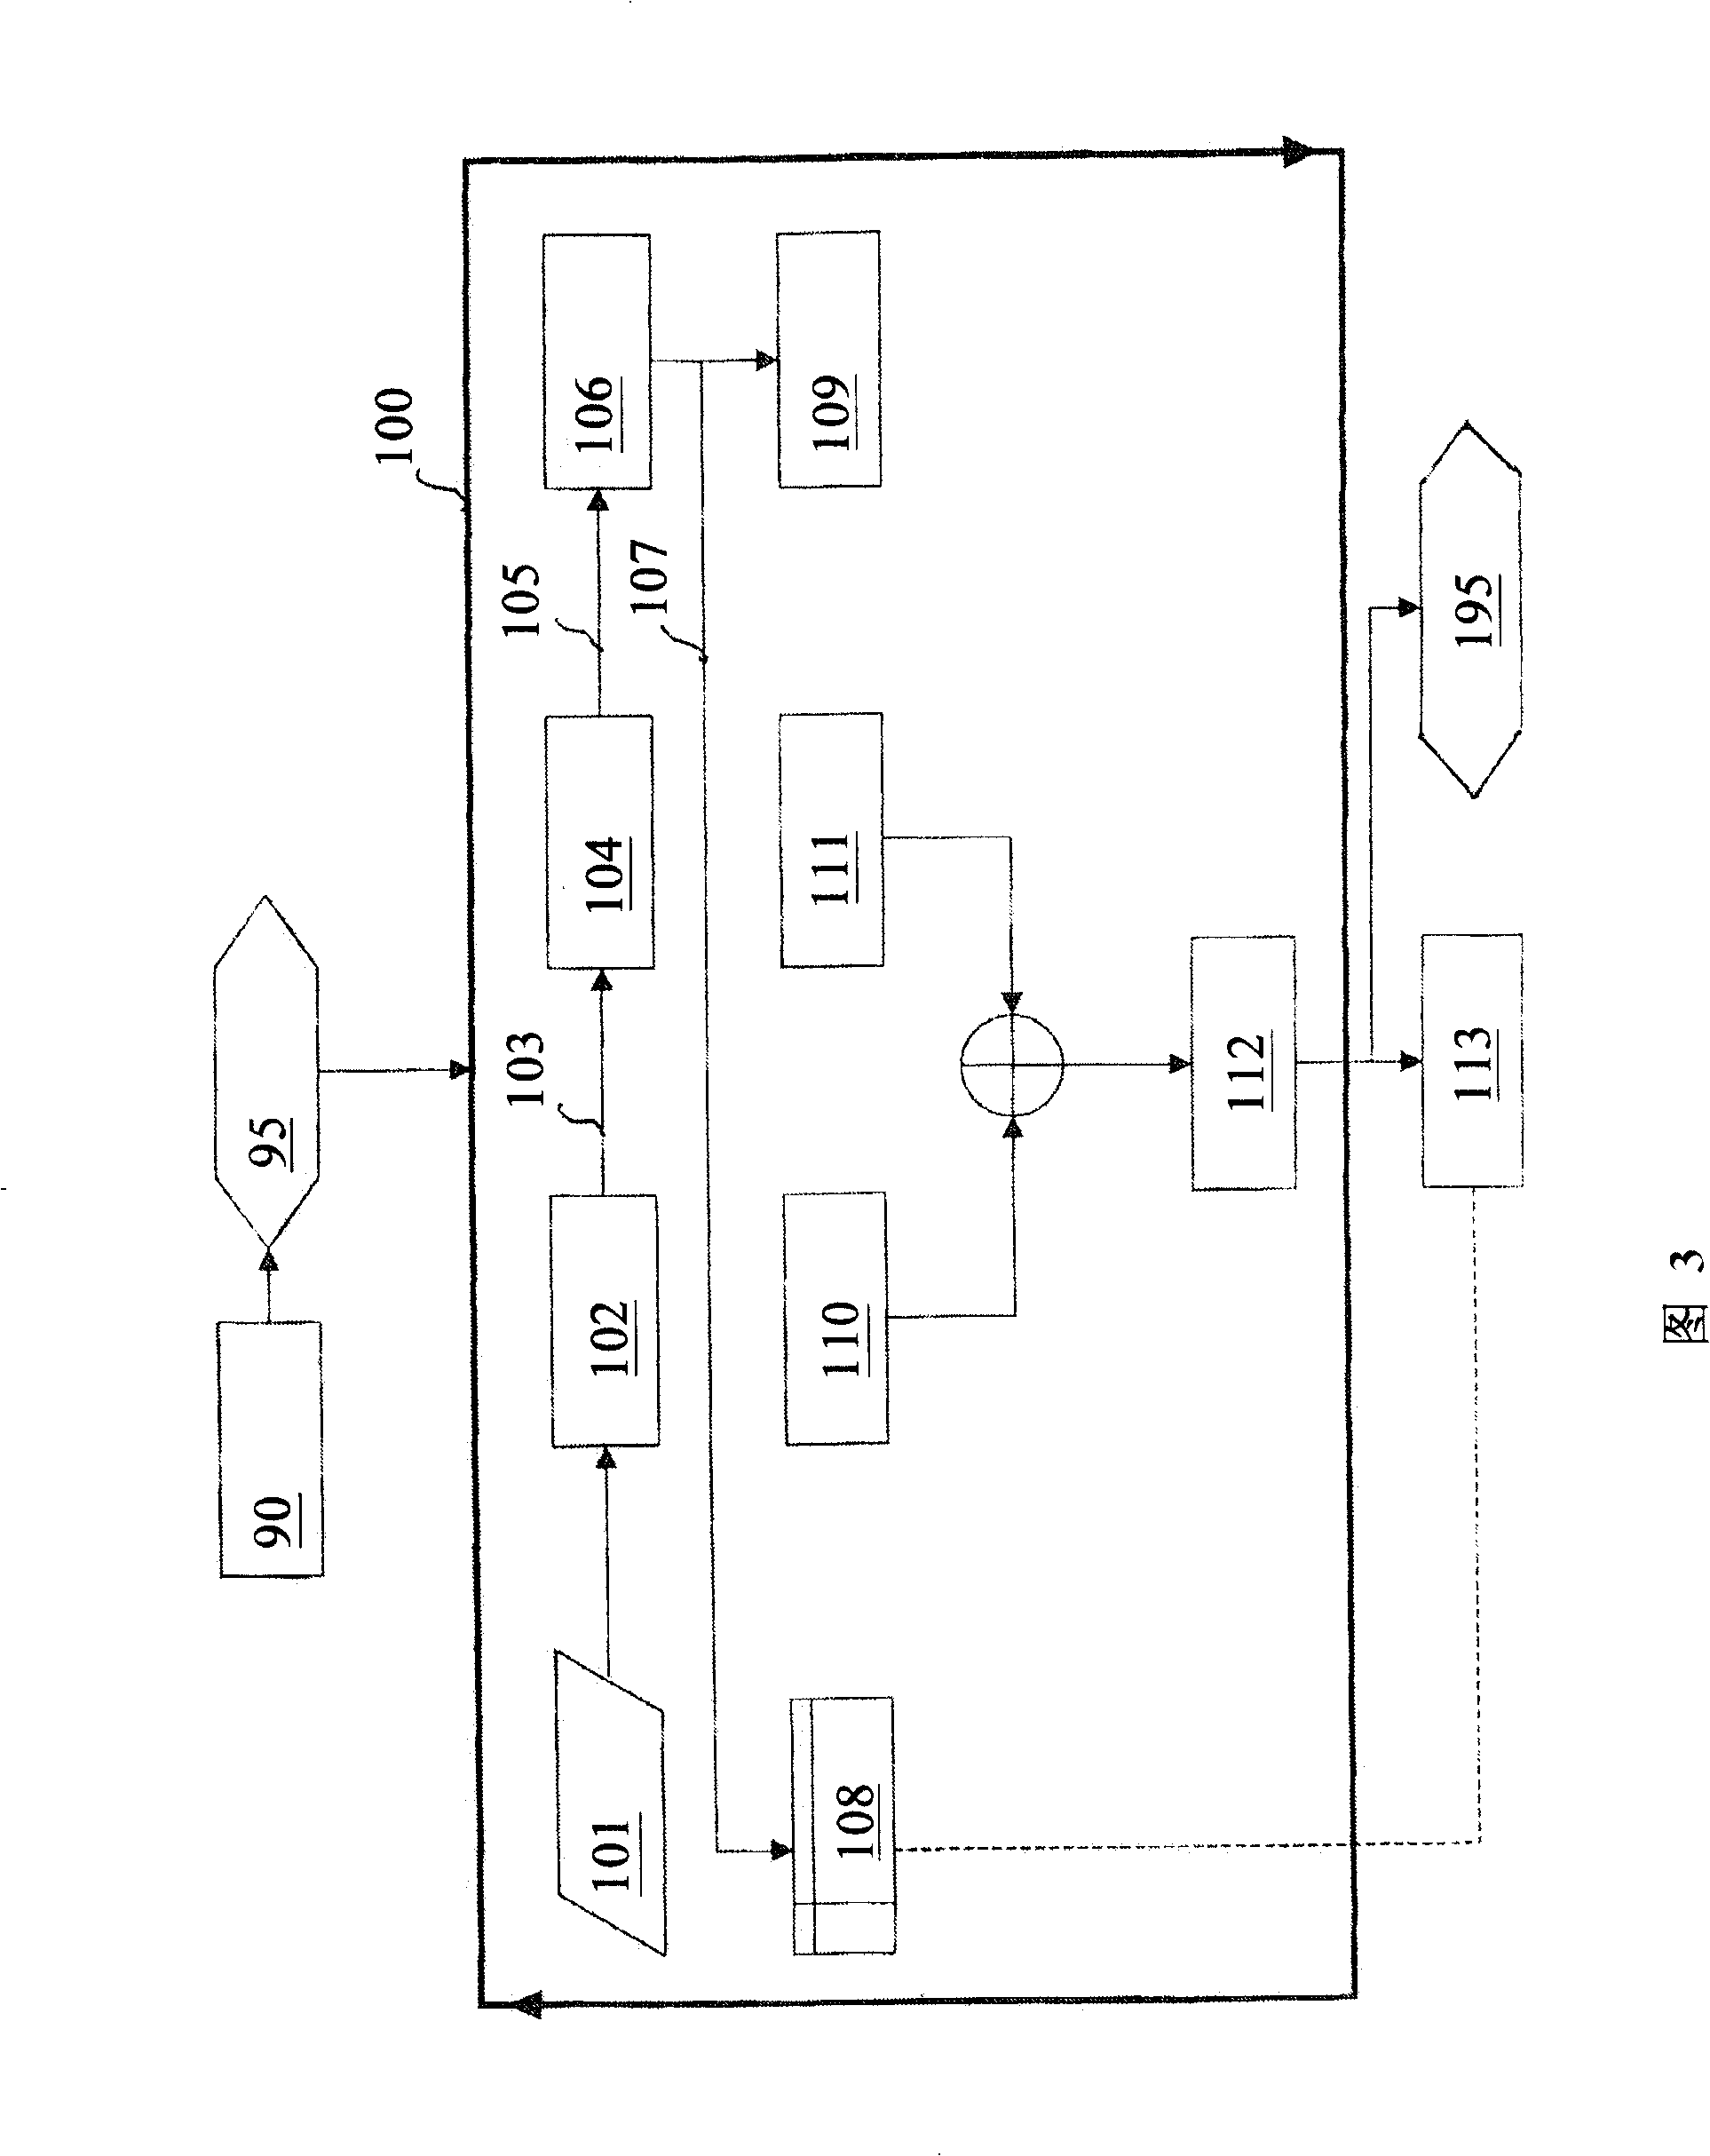 Method for non-contact dynamic detection of solid contour